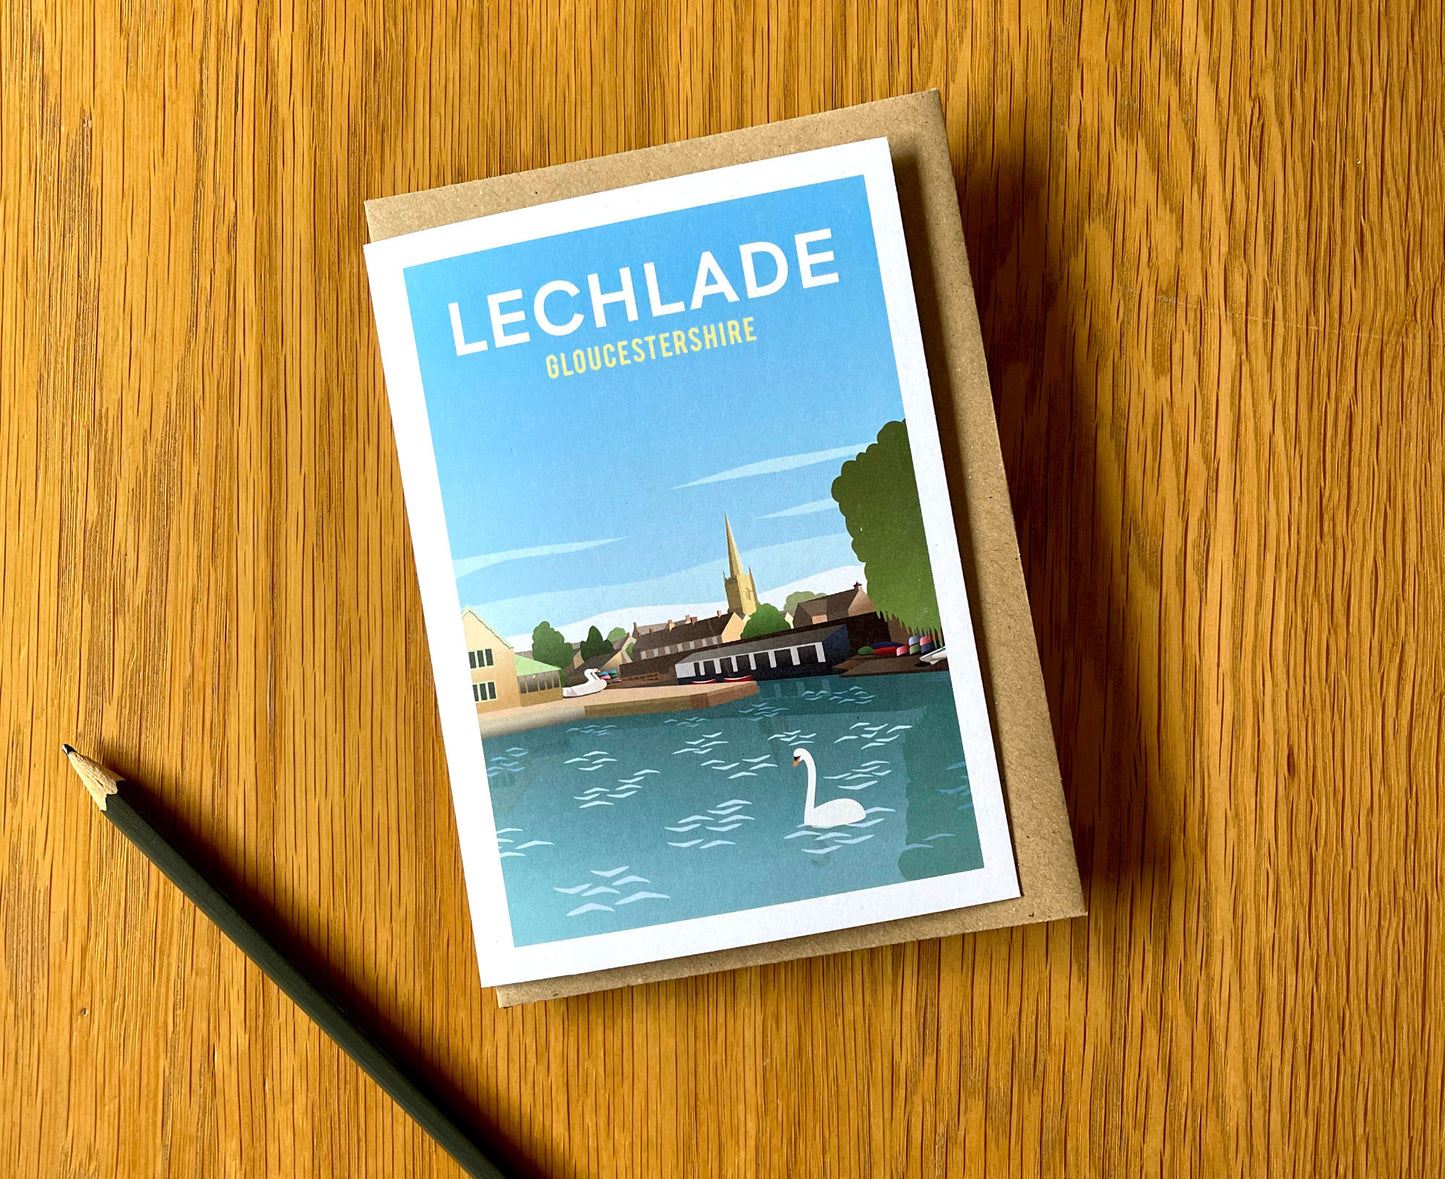 Lechlade Greeting Card on table